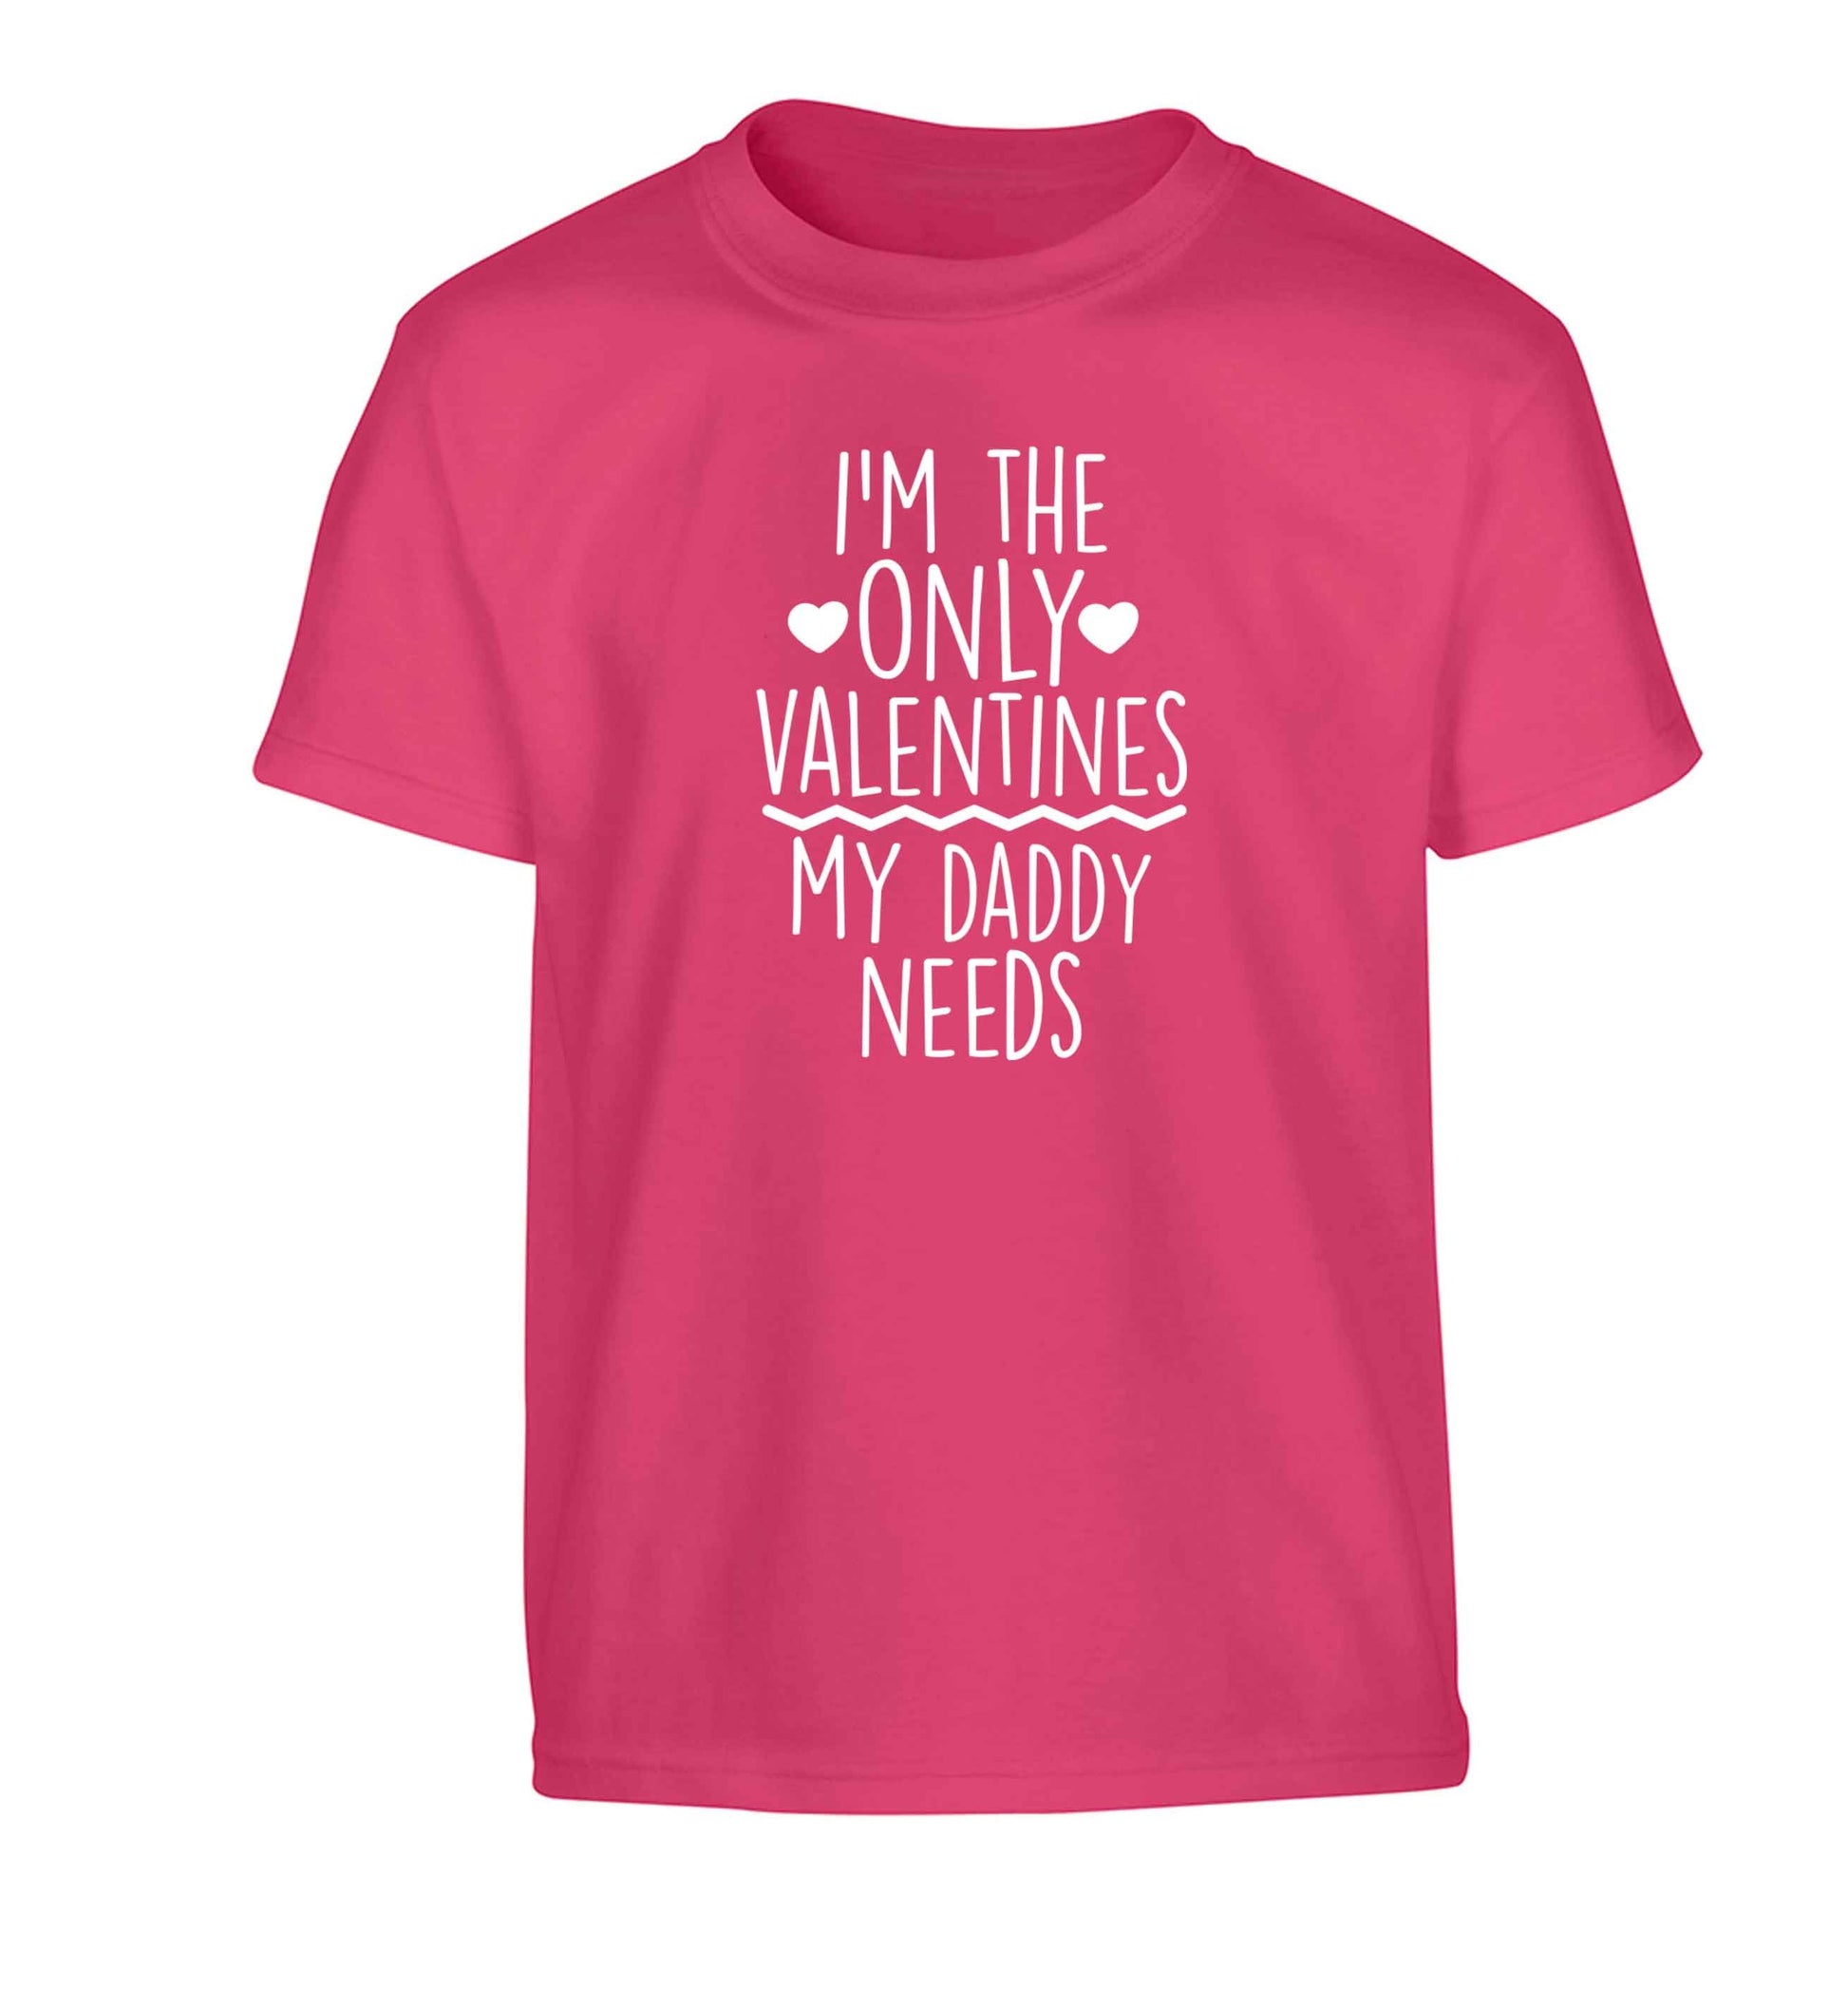 I'm the only valentines my daddy needs Children's pink Tshirt 12-13 Years